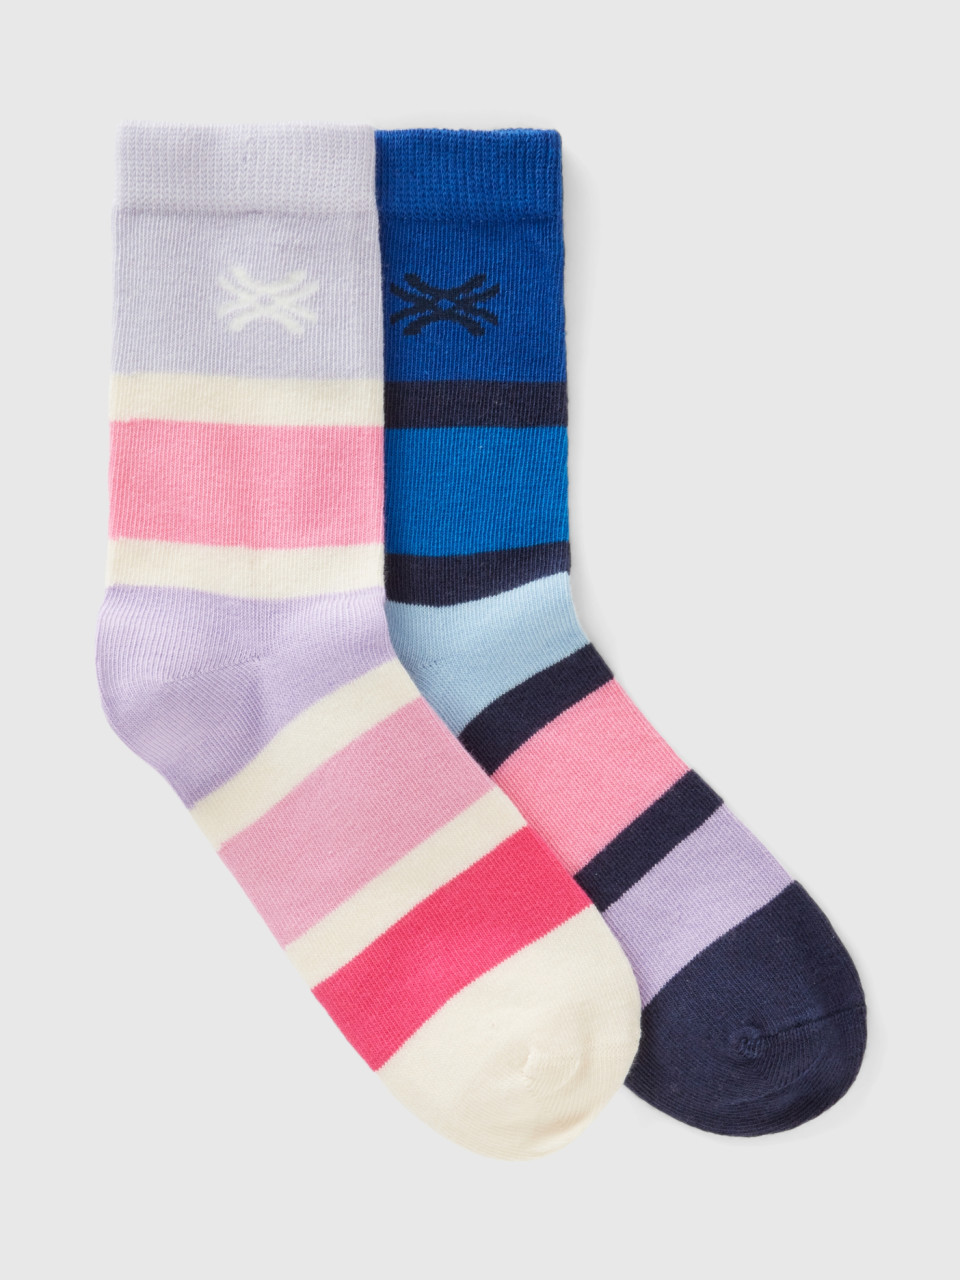 Benetton, Two Pairs Of Striped Socks, Multi-color, Kids